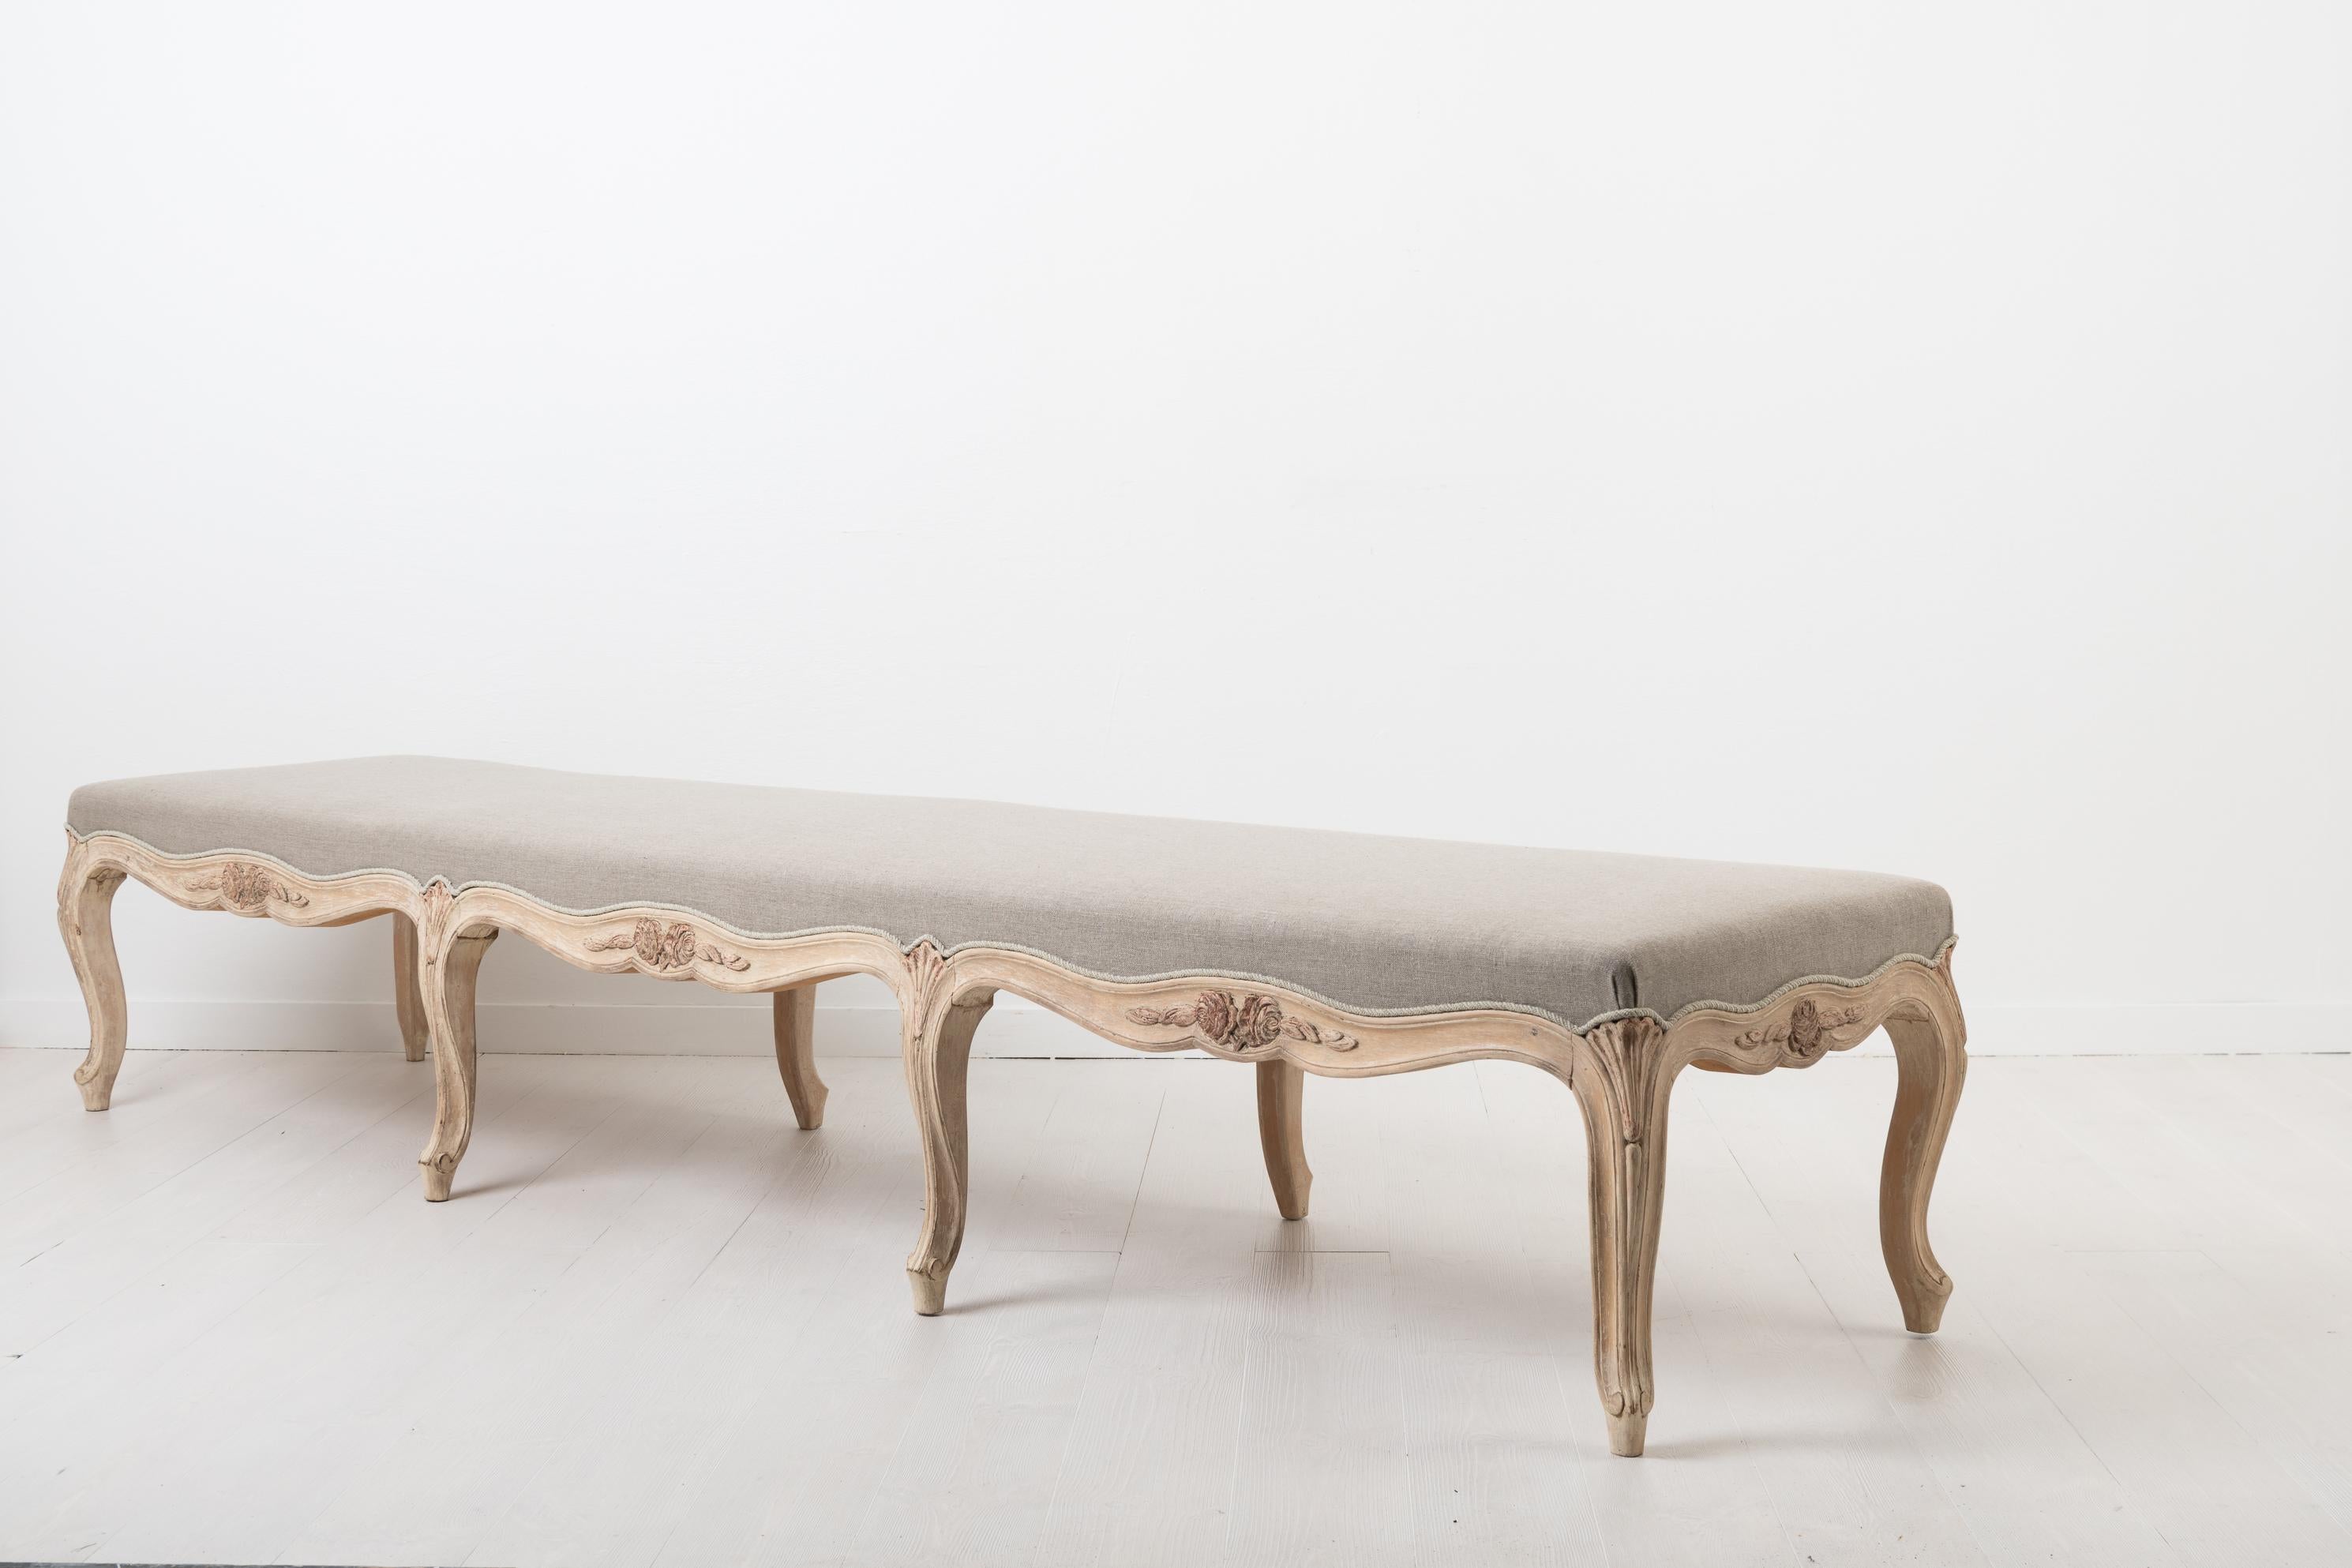 Hand-Crafted 19th Century Swedish Rococo Revival Bench